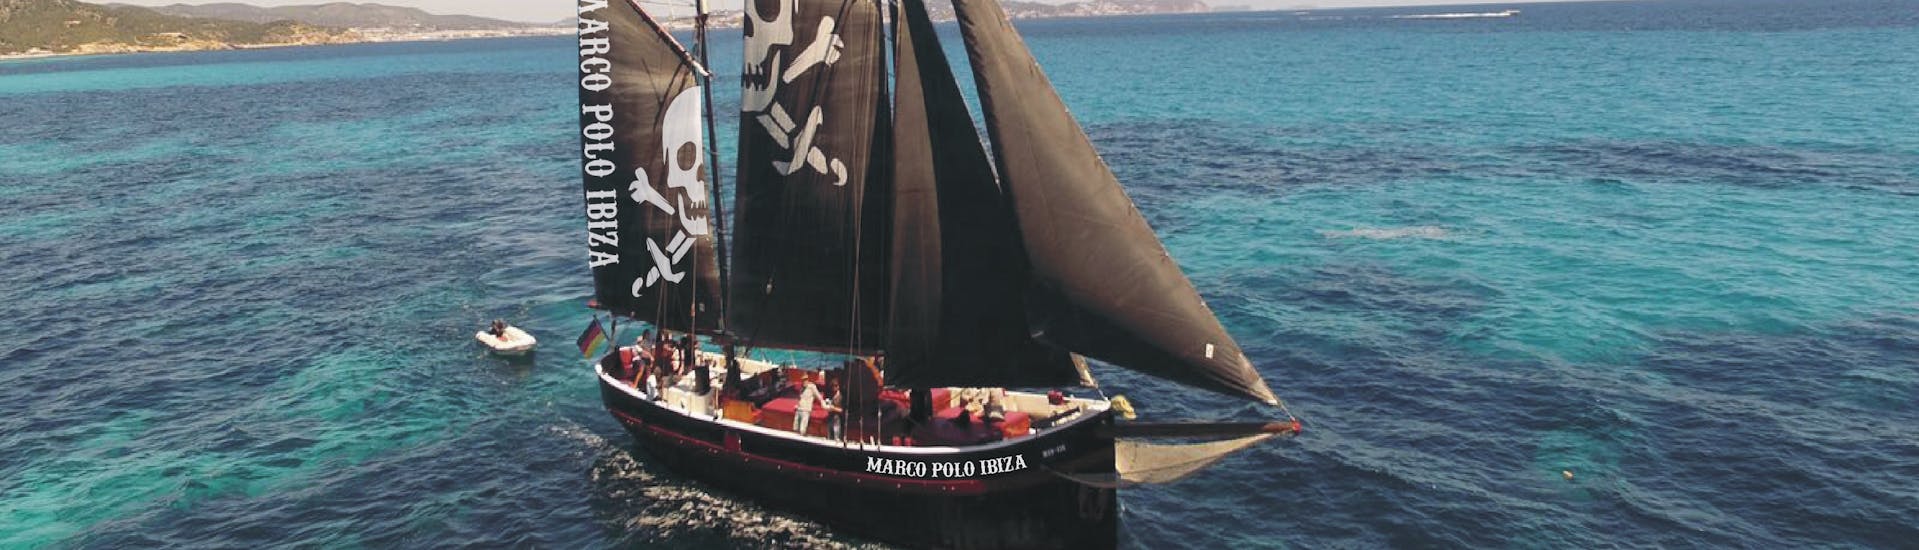 Our pirate boat is navigating the sea during the Private Pirate Sailing Trip to Formentera with Apéritif & Snorkeling with Marco Polo Ibiza.